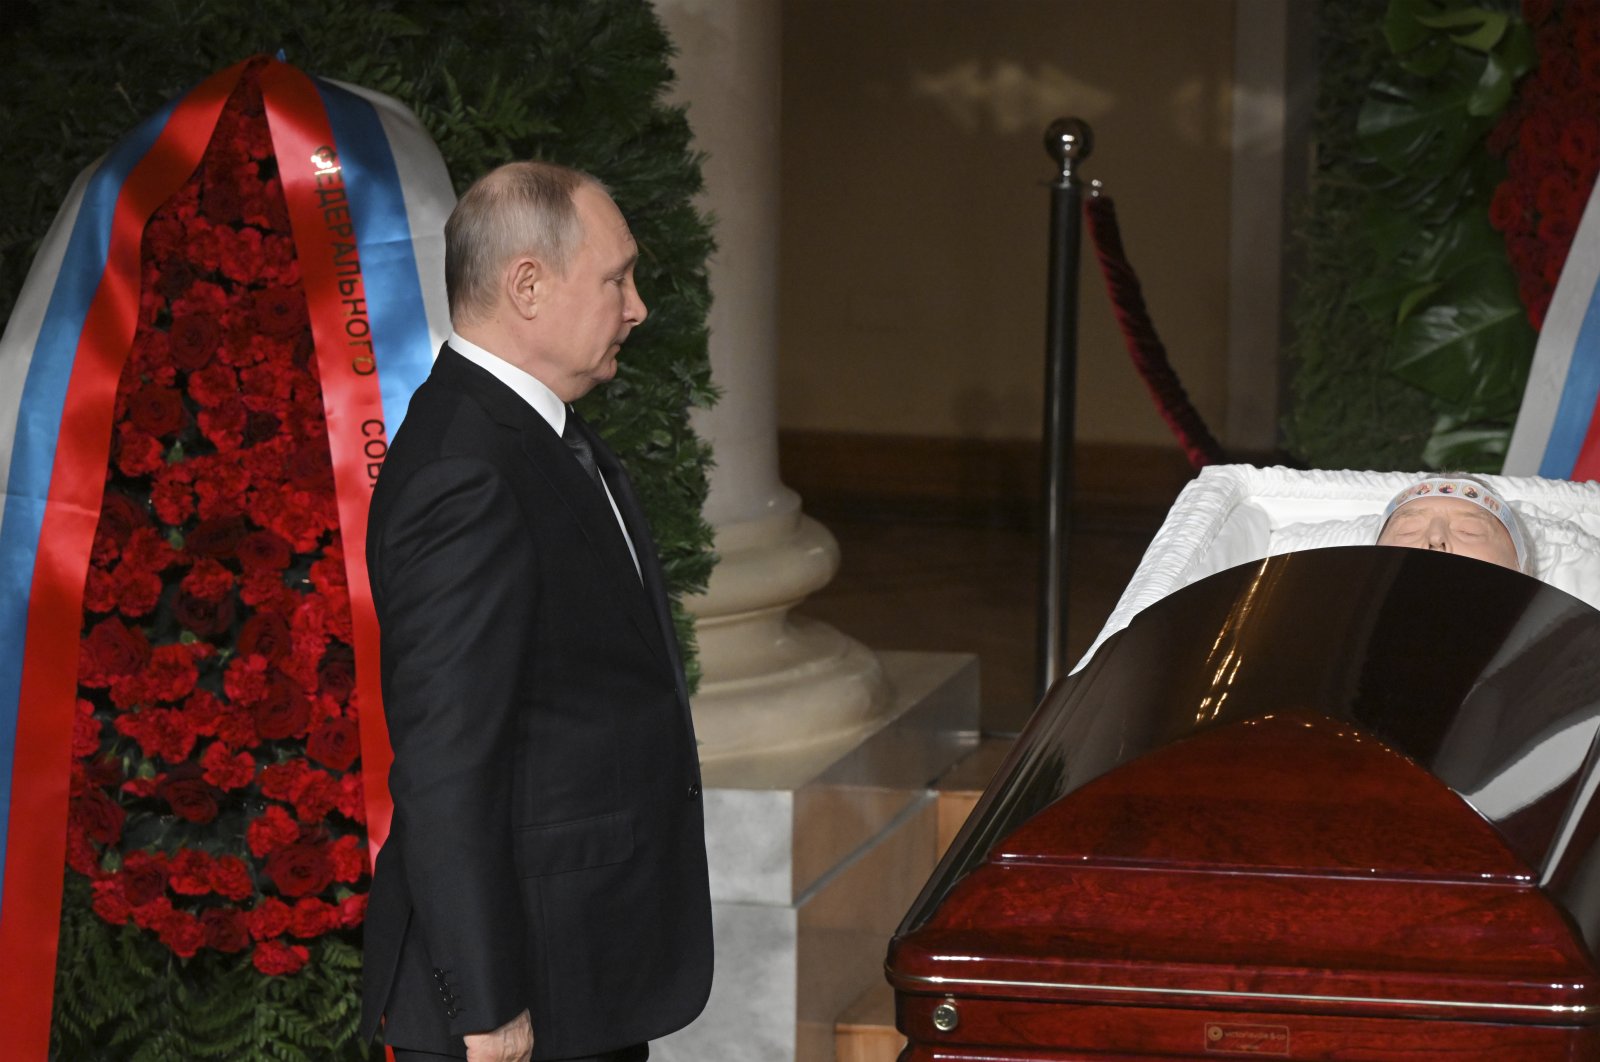 Russian President Vladimir Putin stands by the coffin of Russian Liberal Democratic Party leader Vladimir Zhirinovsky during a farewell ceremony in Moscow, Russia, April 8, 2022. (AP Photo)